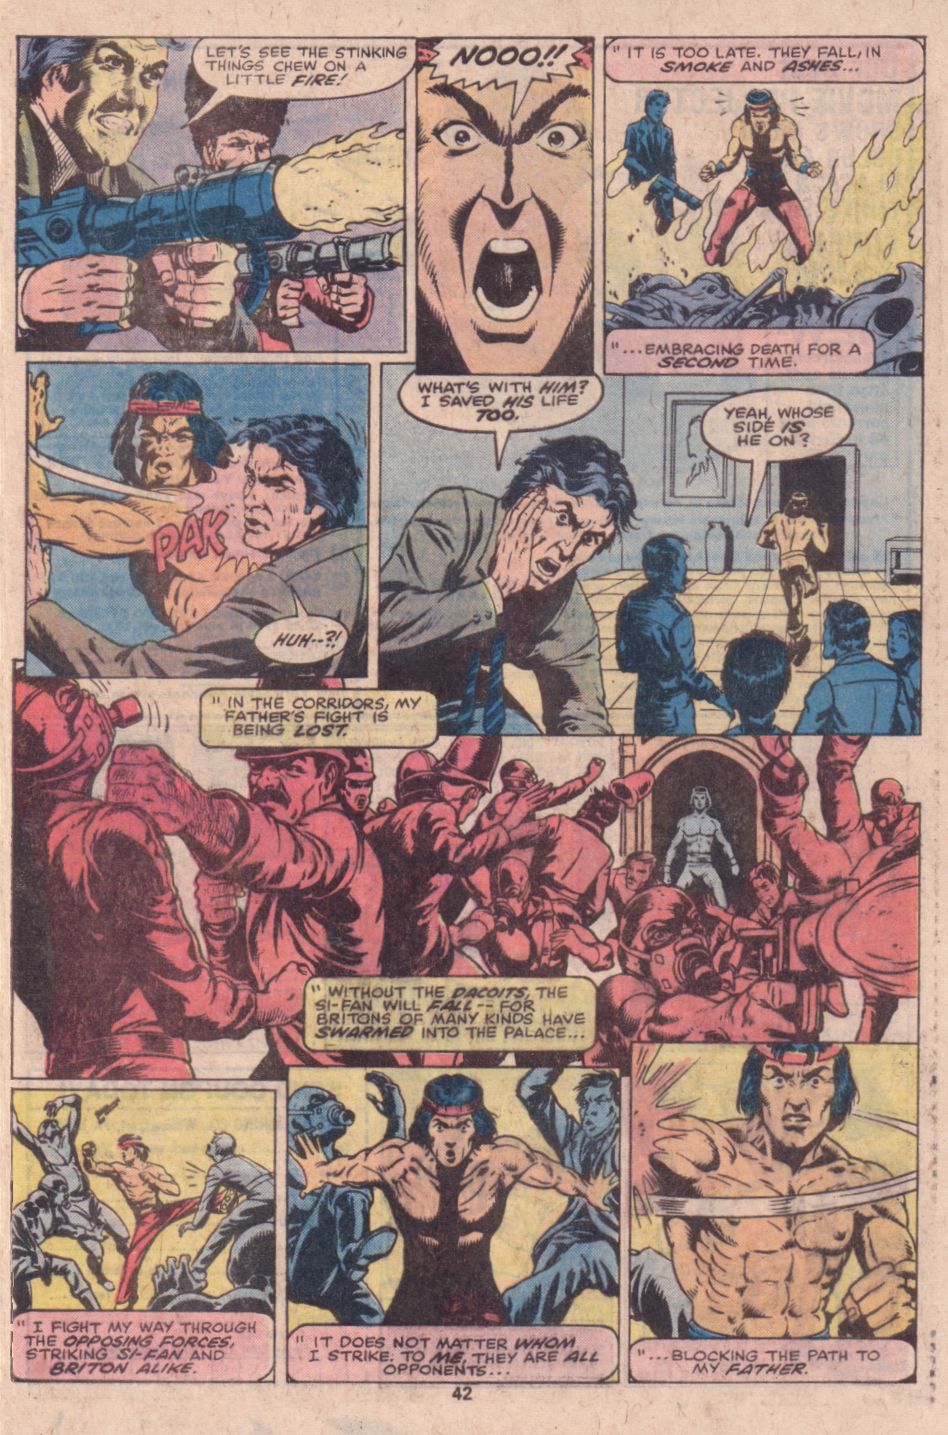 What If? (1977) issue 16 - Shang Chi Master of Kung Fu fought on The side of Fu Manchu - Page 32